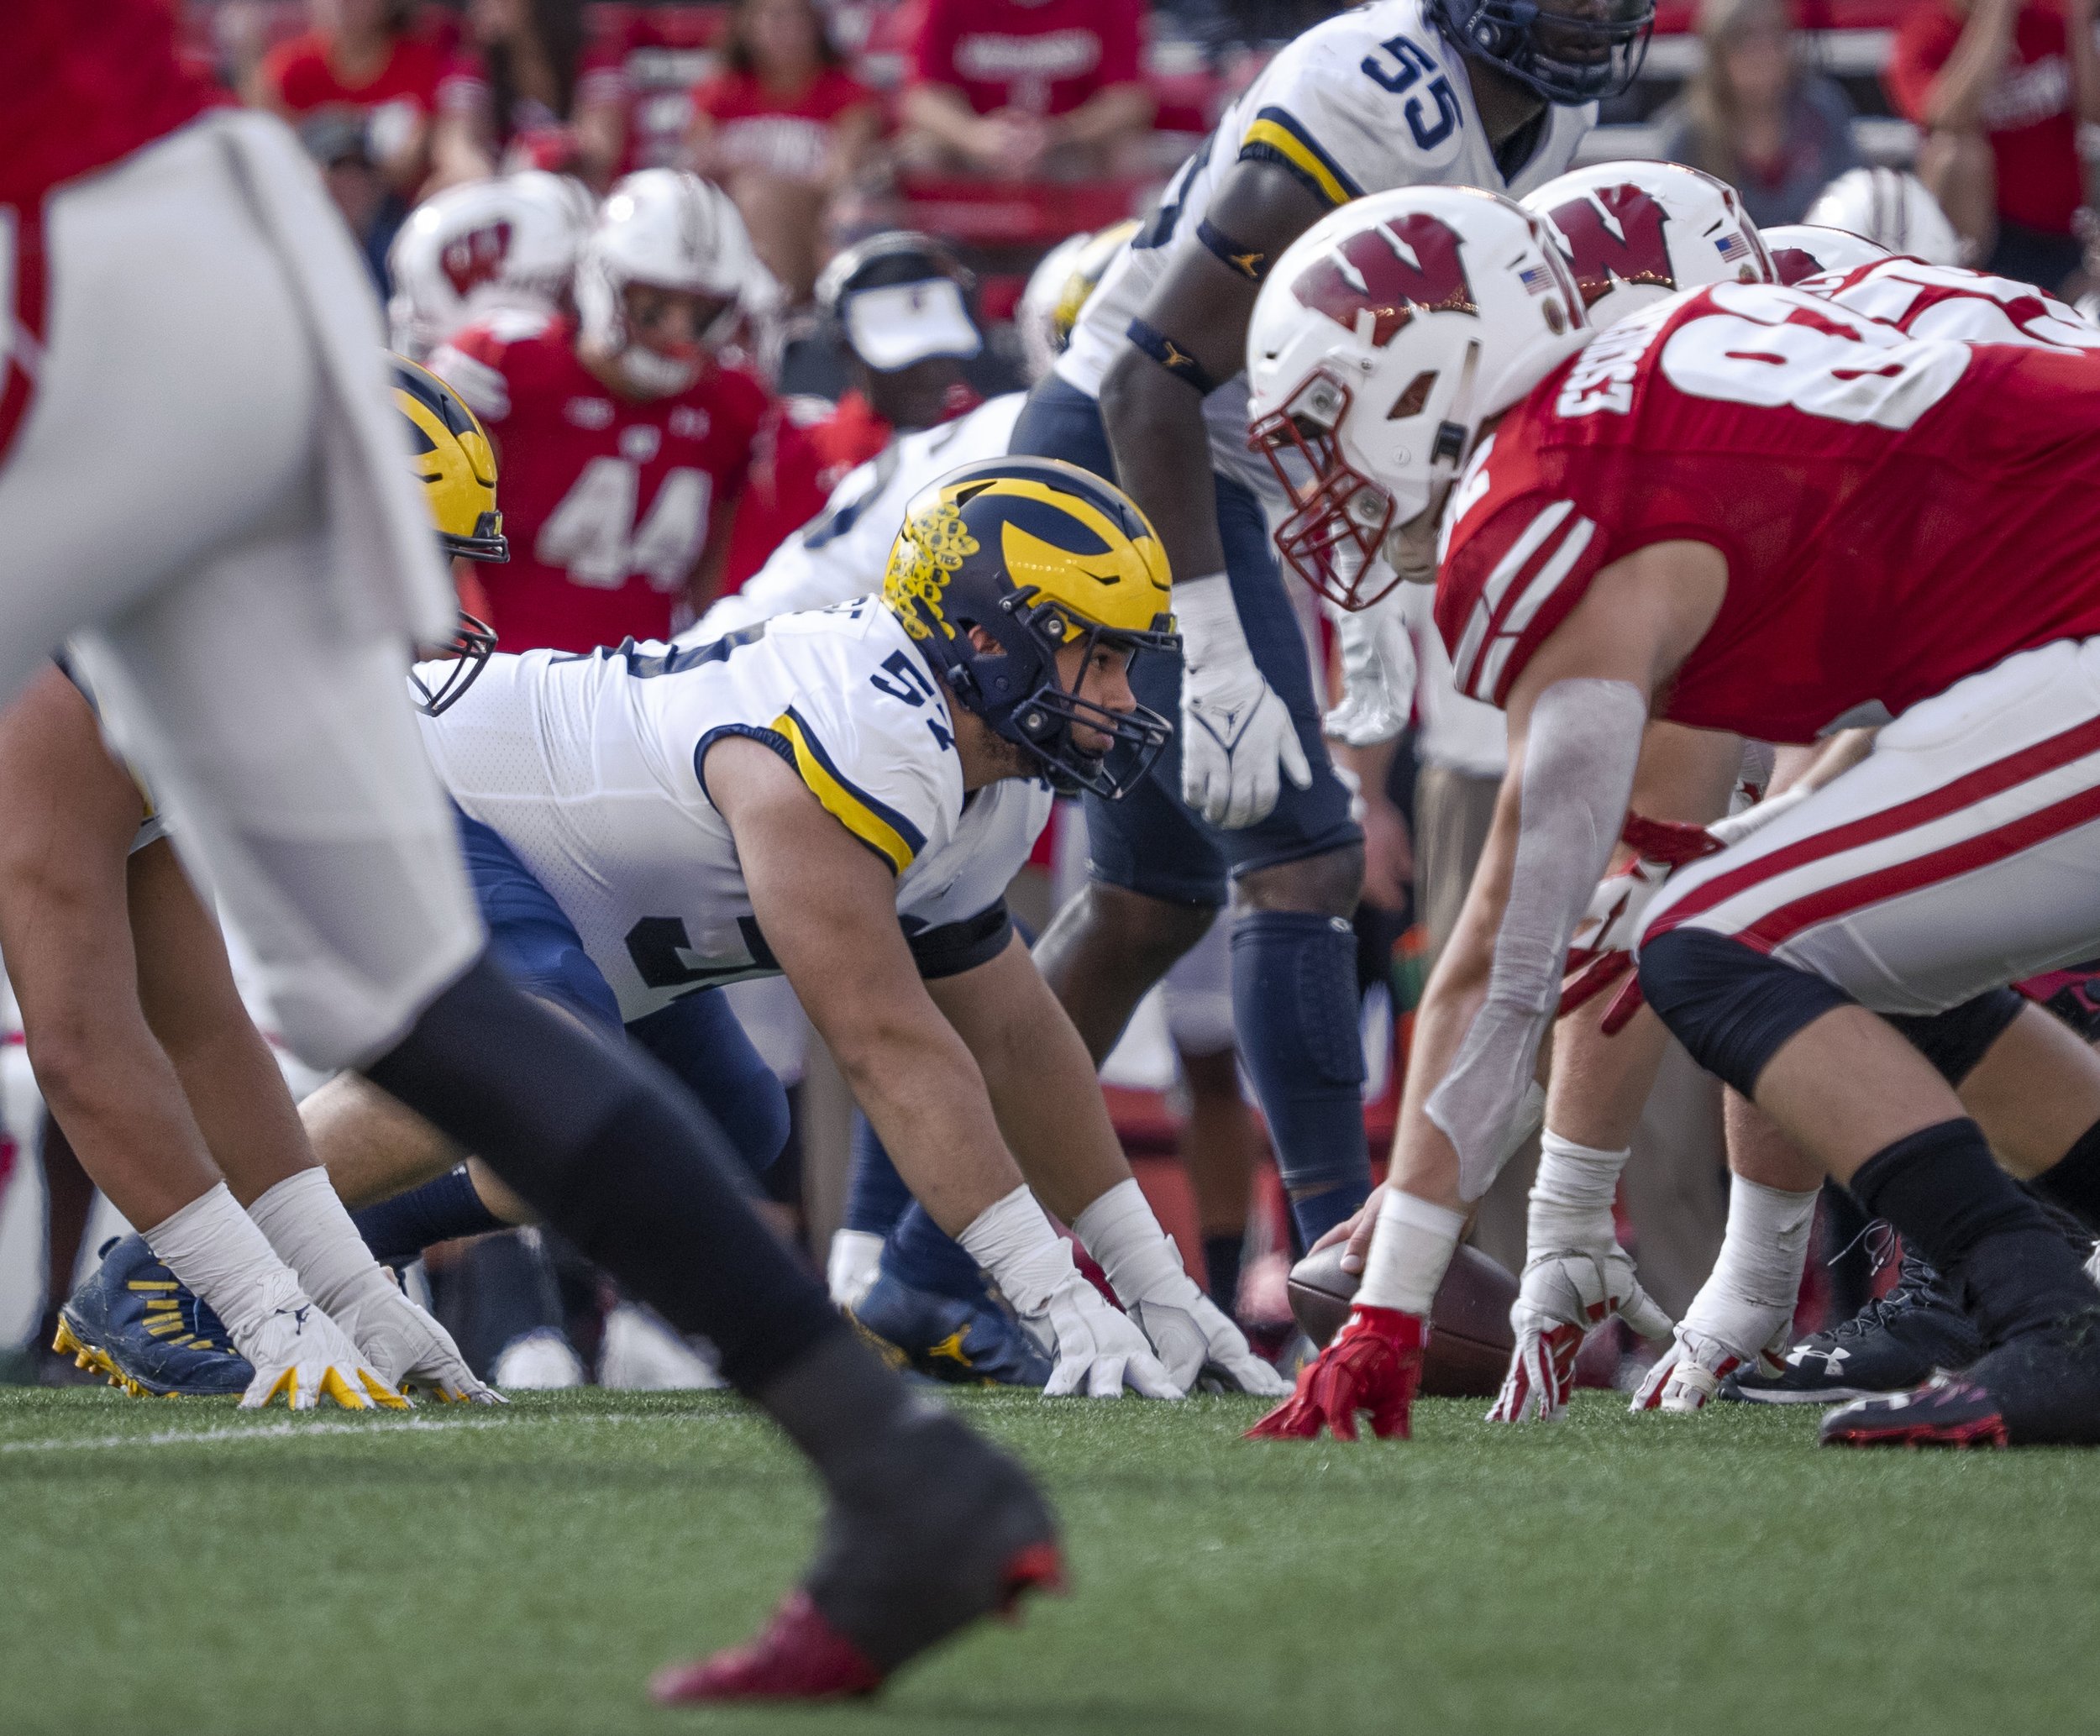  Joey George gets ready to go to work against Wisconsin during U-M’s 38-17 win October 2. 